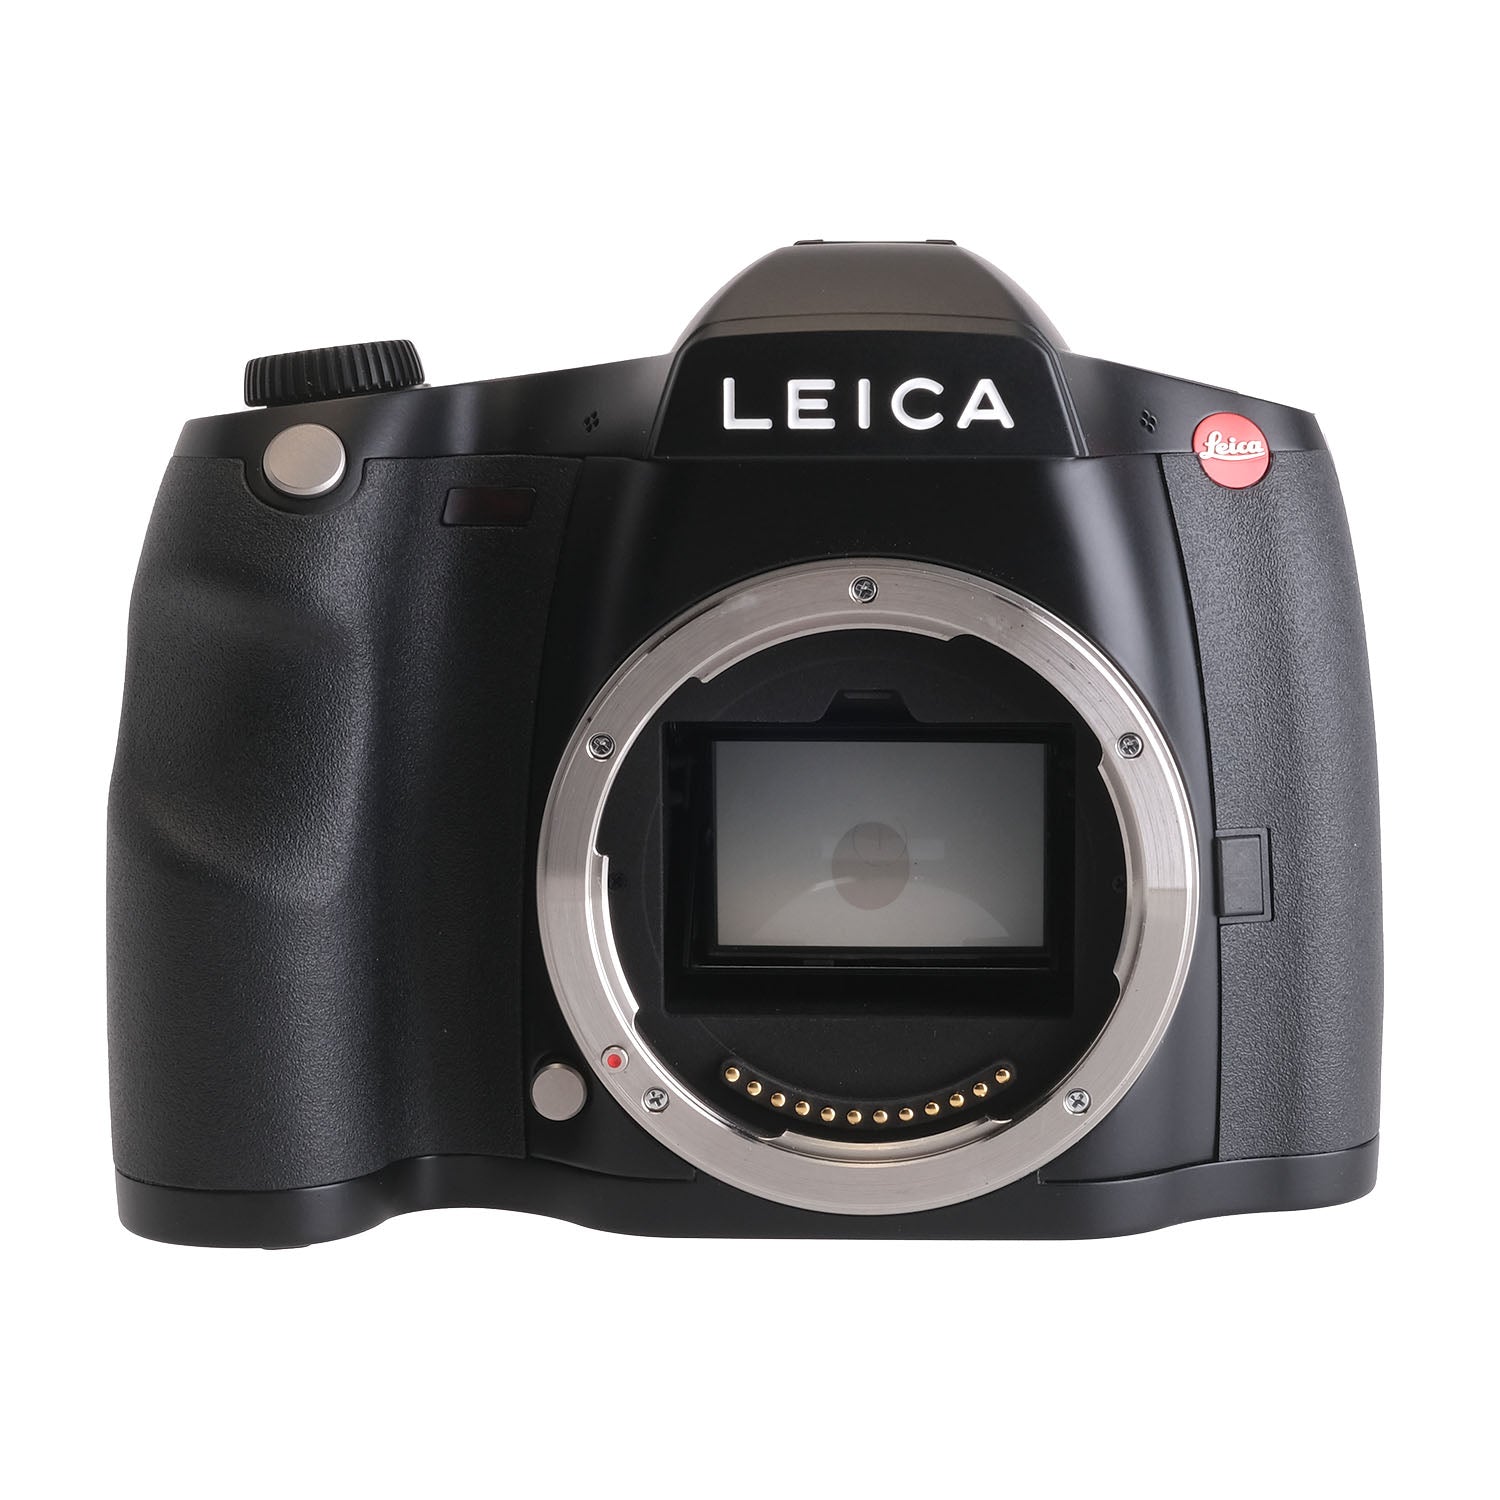 Leica S3, Boxed 5251412